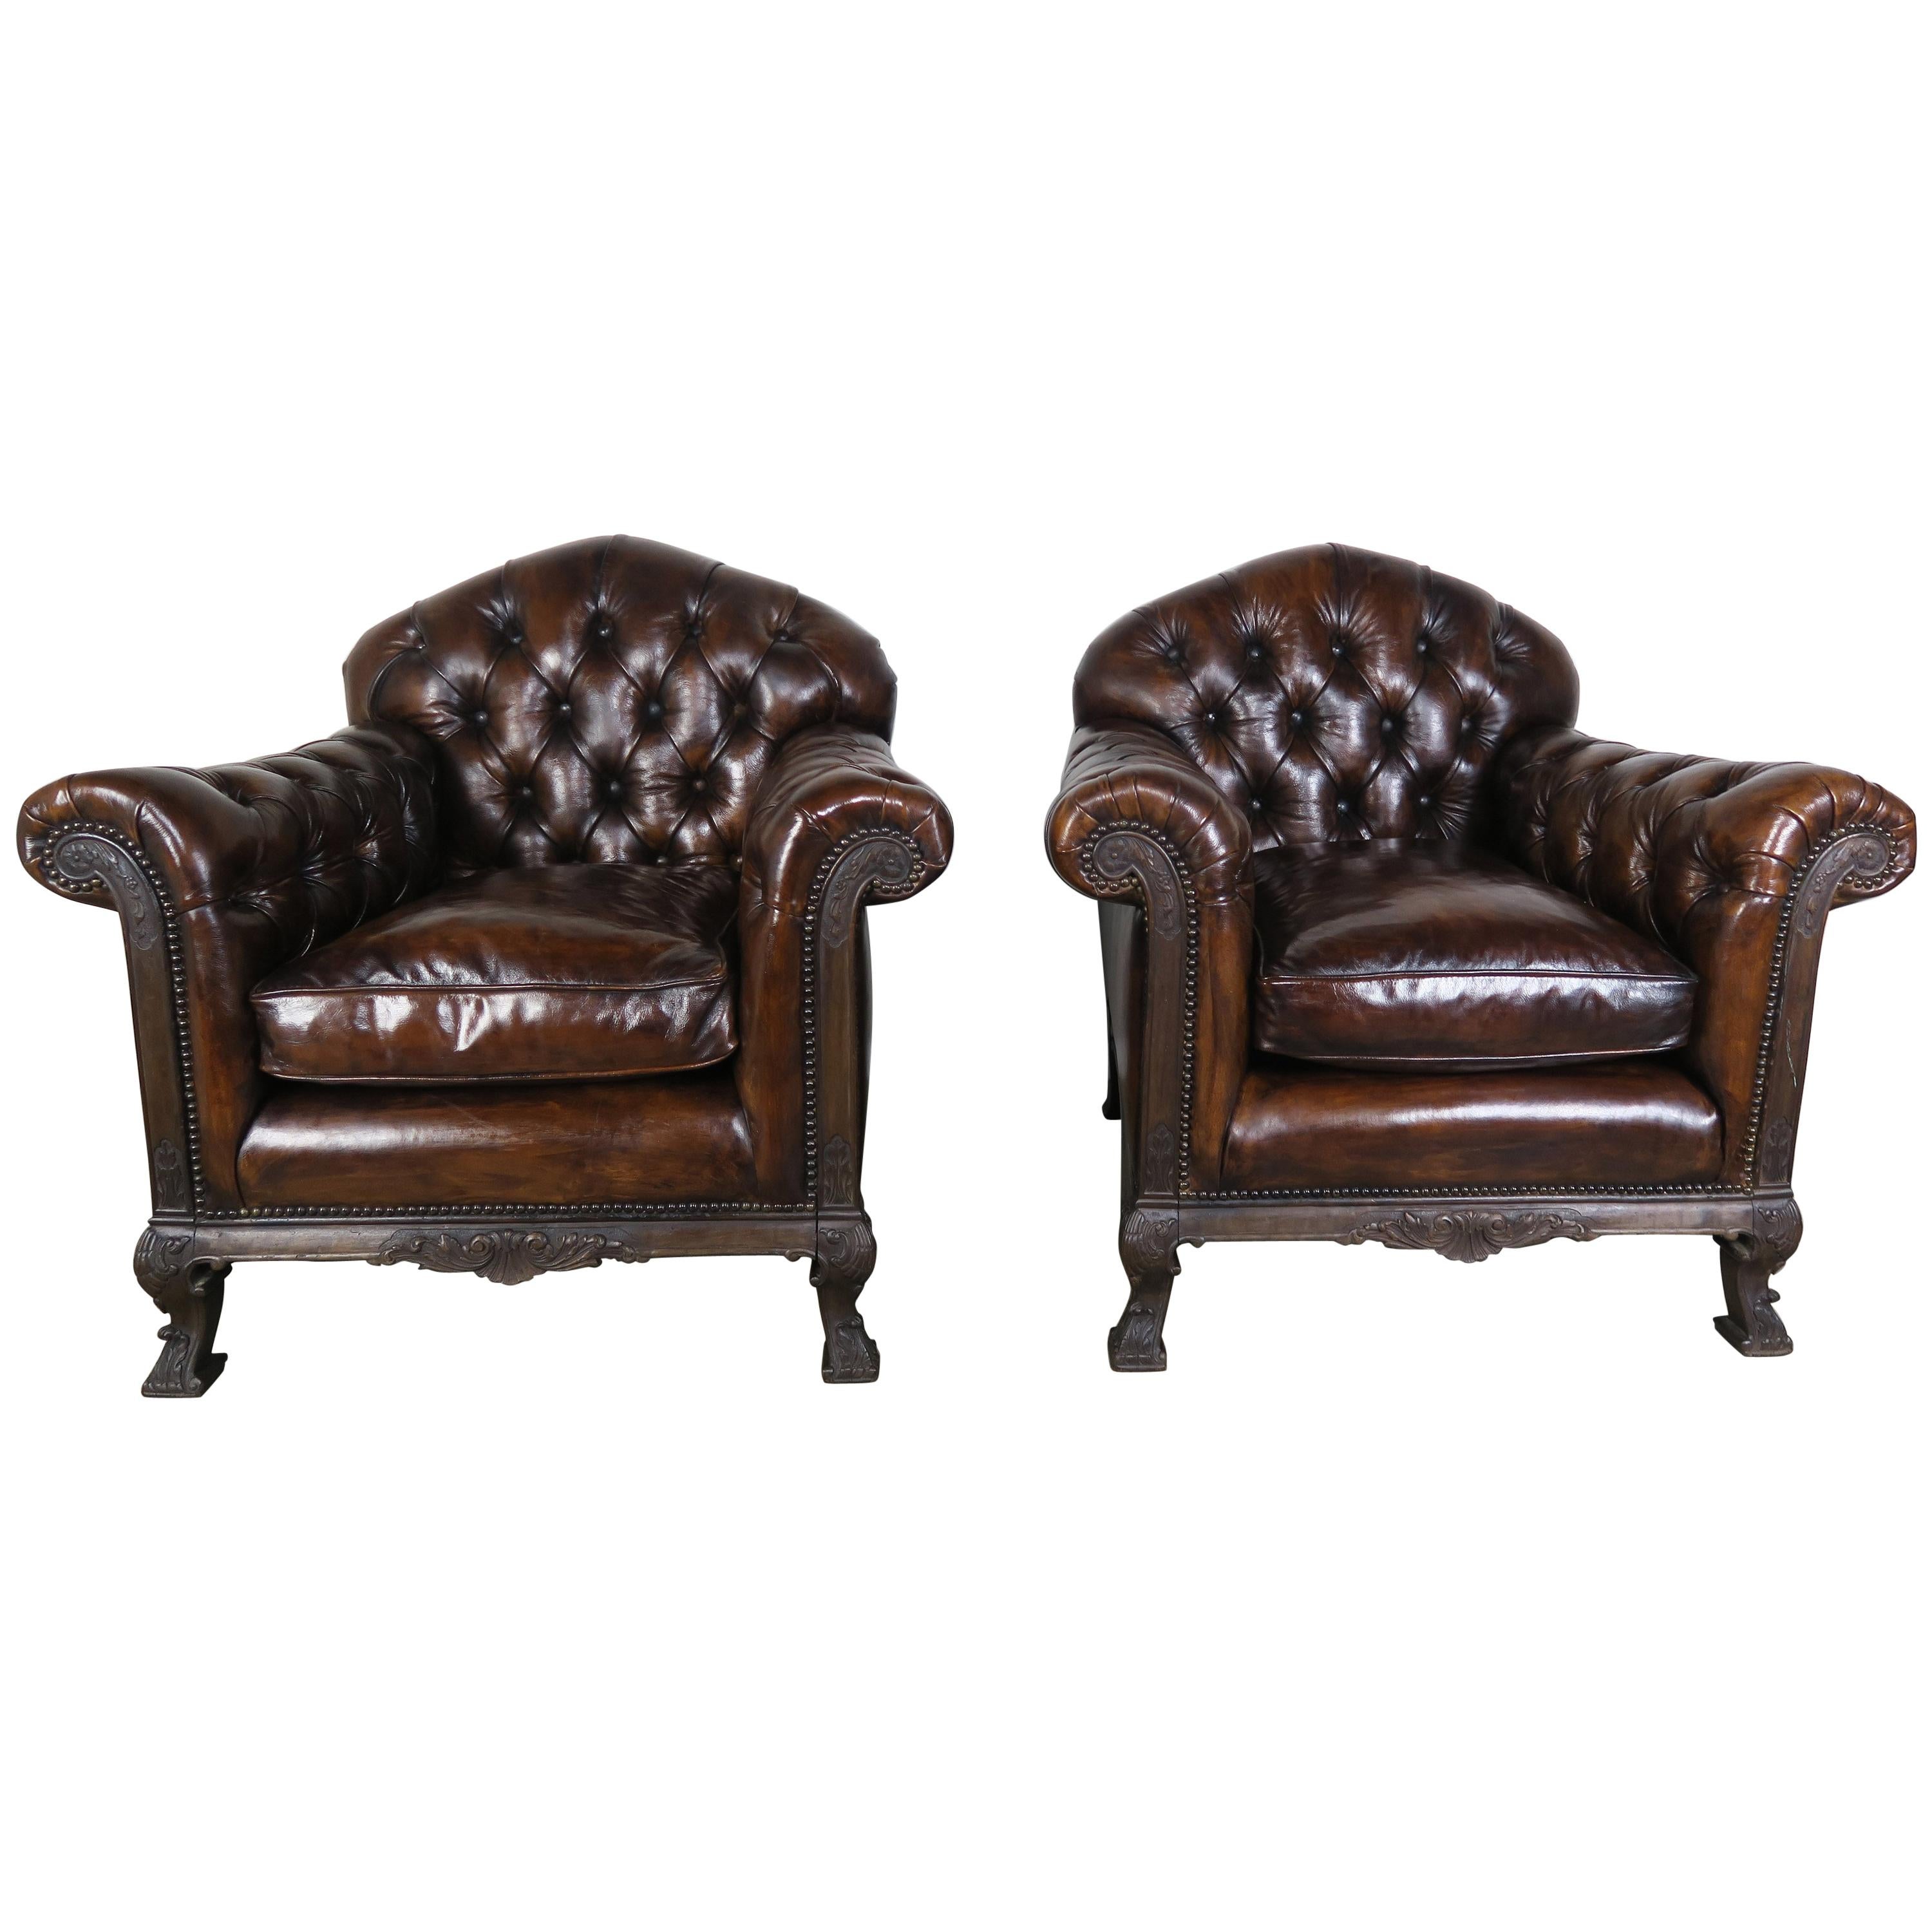 French Deco Style Leather Tufted Armchairs, Pair